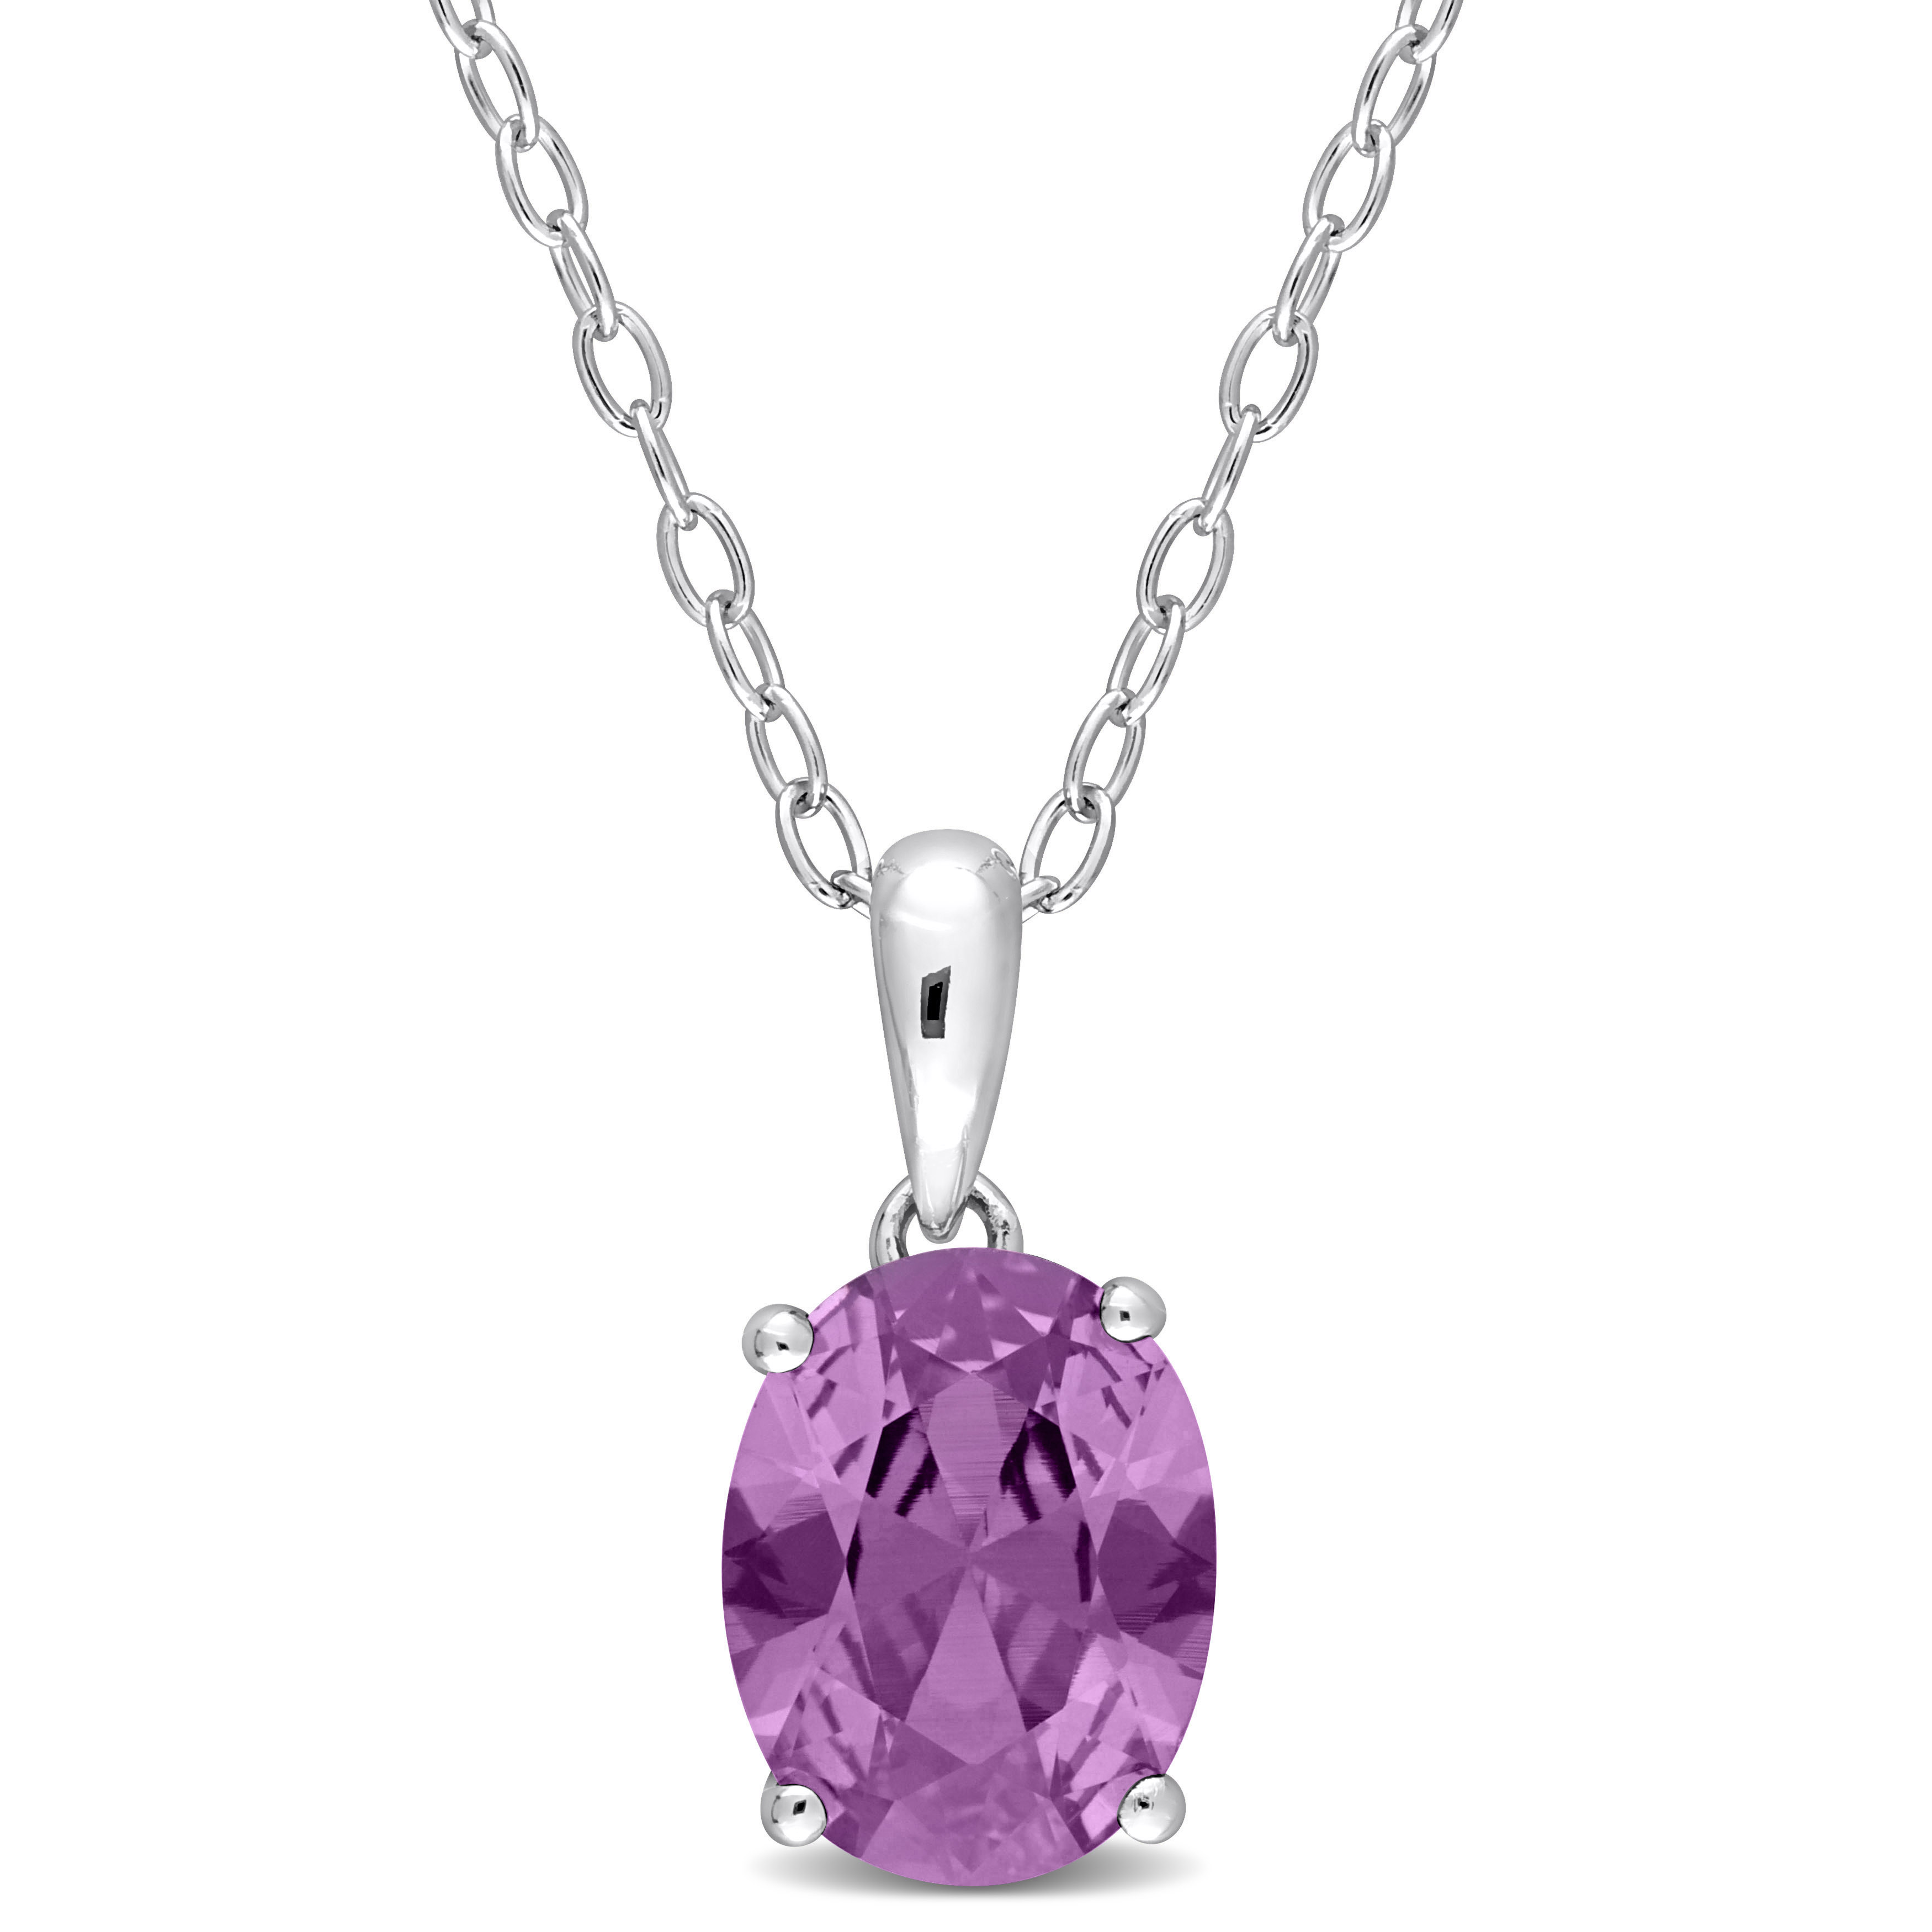 2 1/2 CT TGW Oval Simulated Alexandrite Solitaire Heart Design Pendant with Chain in Sterling Silver - 18 in.